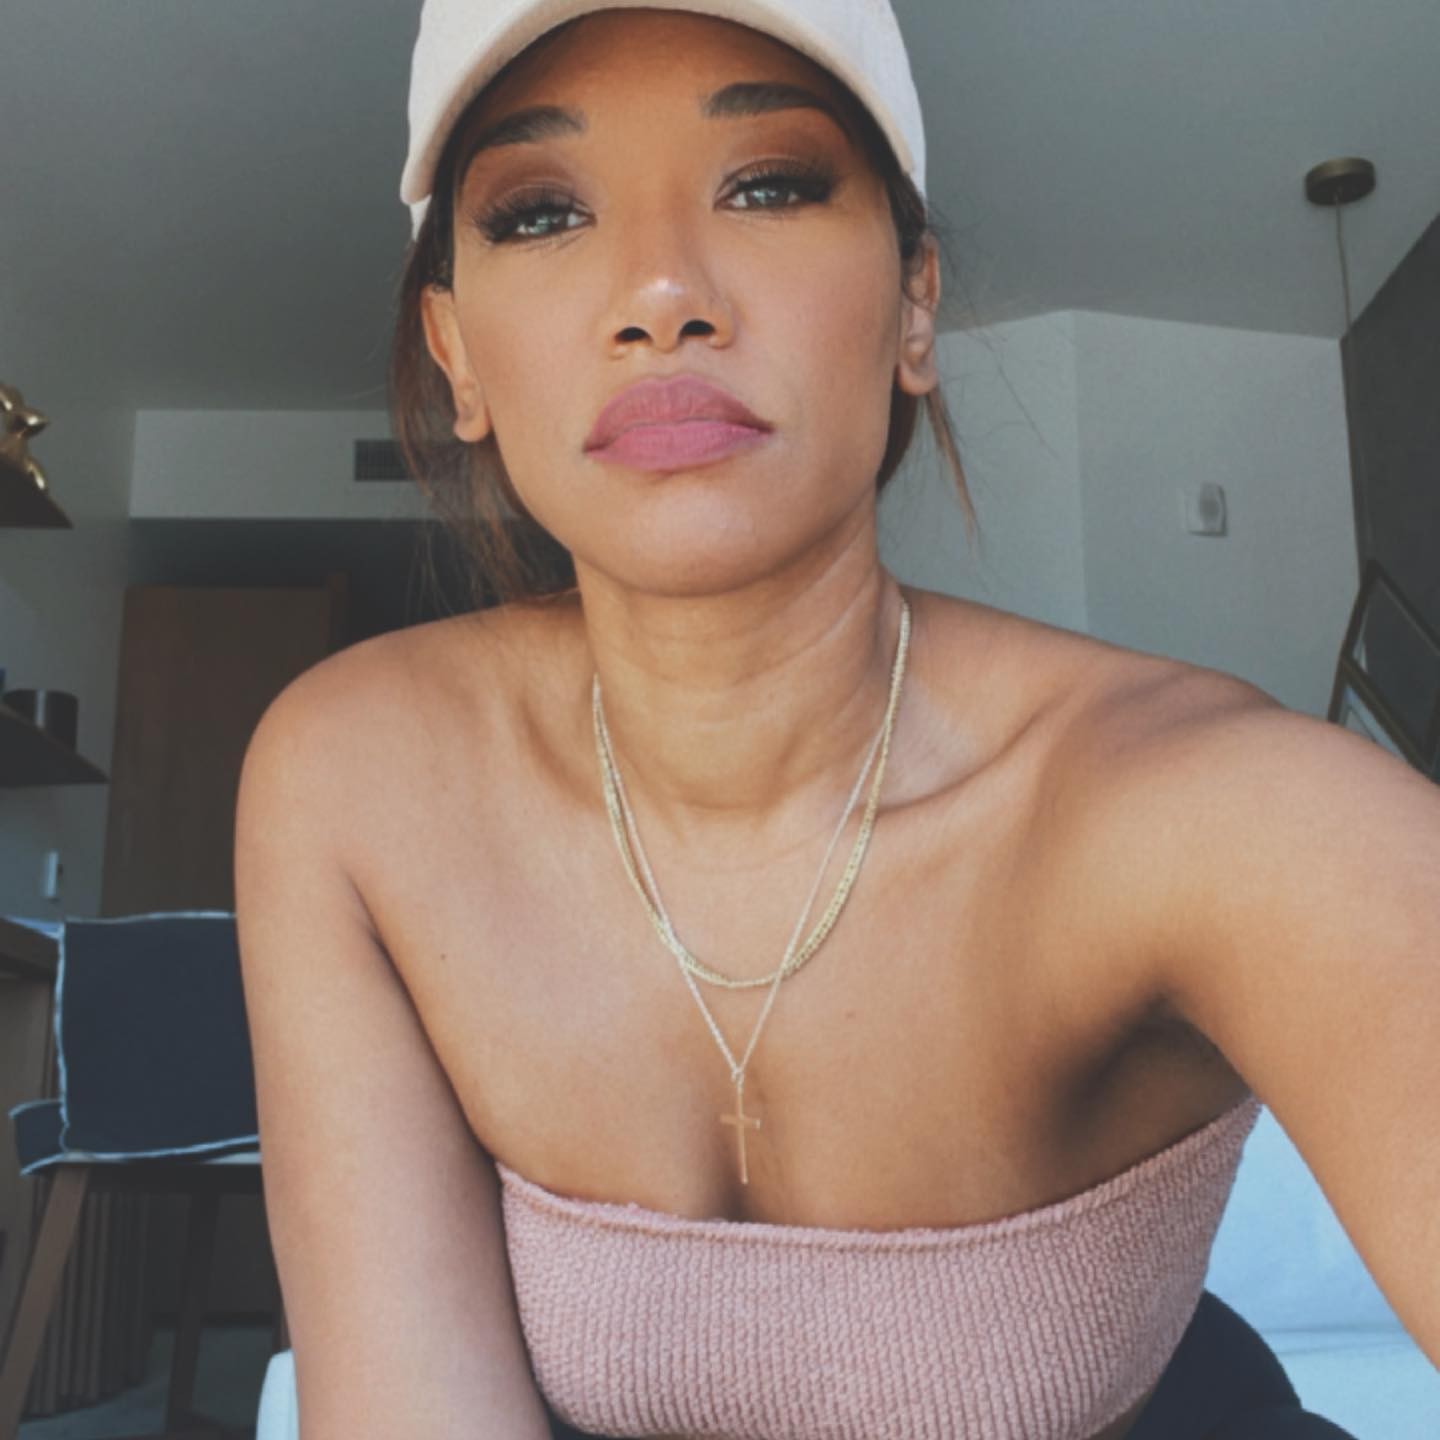 Candice Patton Selfie TheFappening.Pro 11 - Candice Patton Nude Iris West-Allen From “Flash” And “Legends of Tomorrow” (74 Photos)